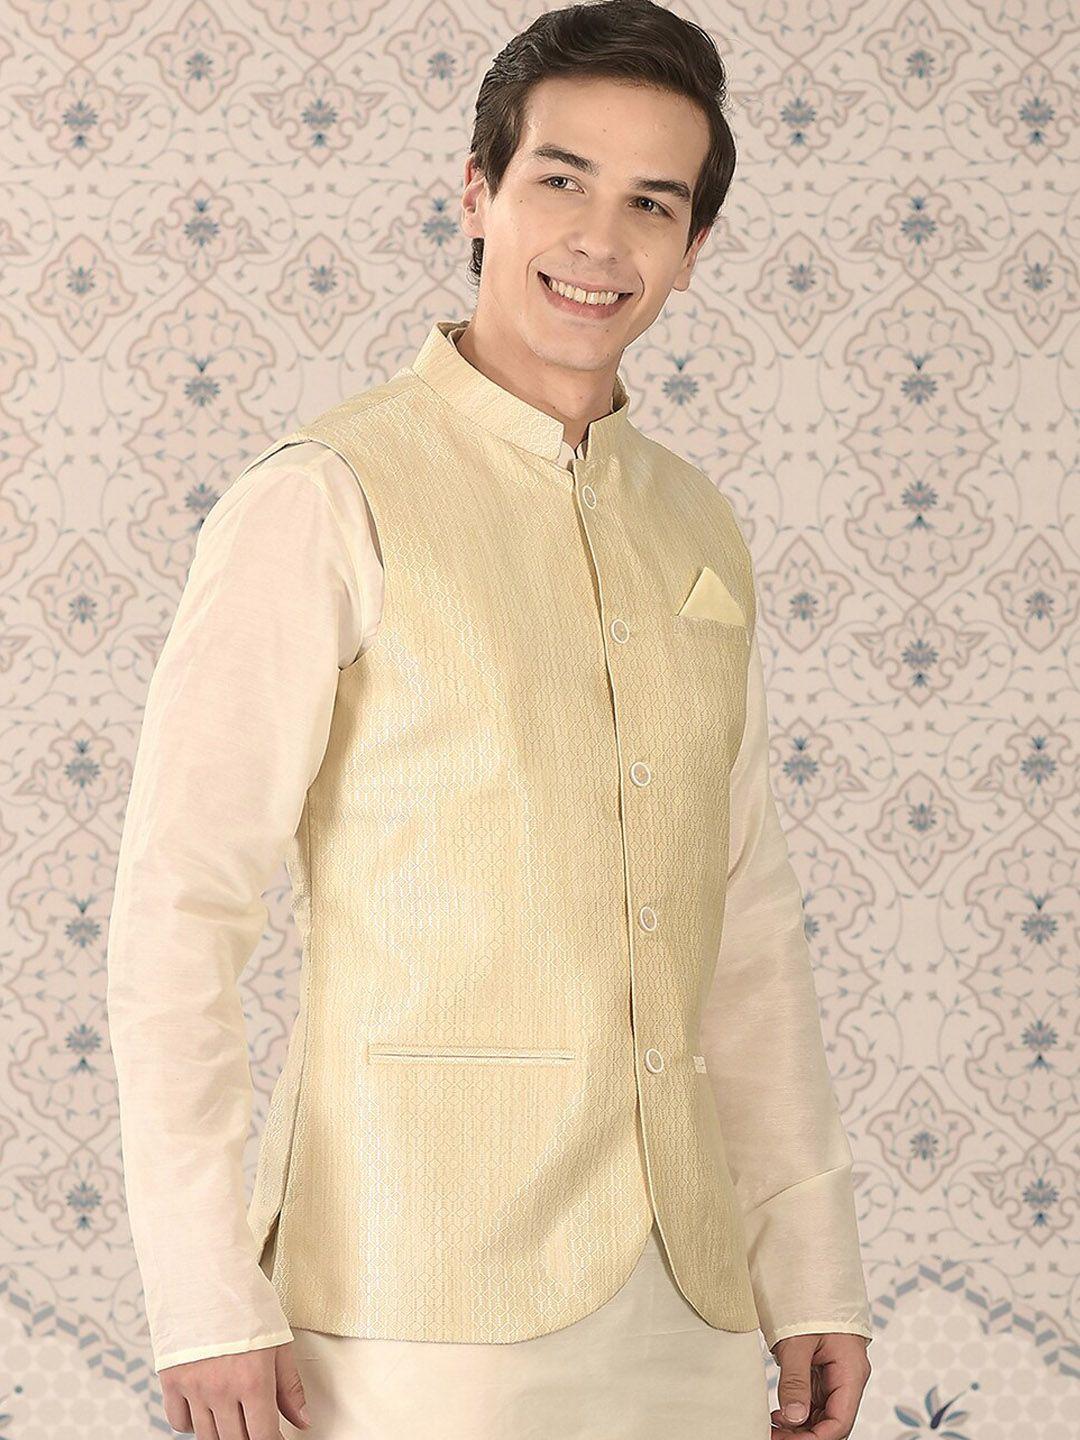 ode by house of pataudi woven design nehru jackets